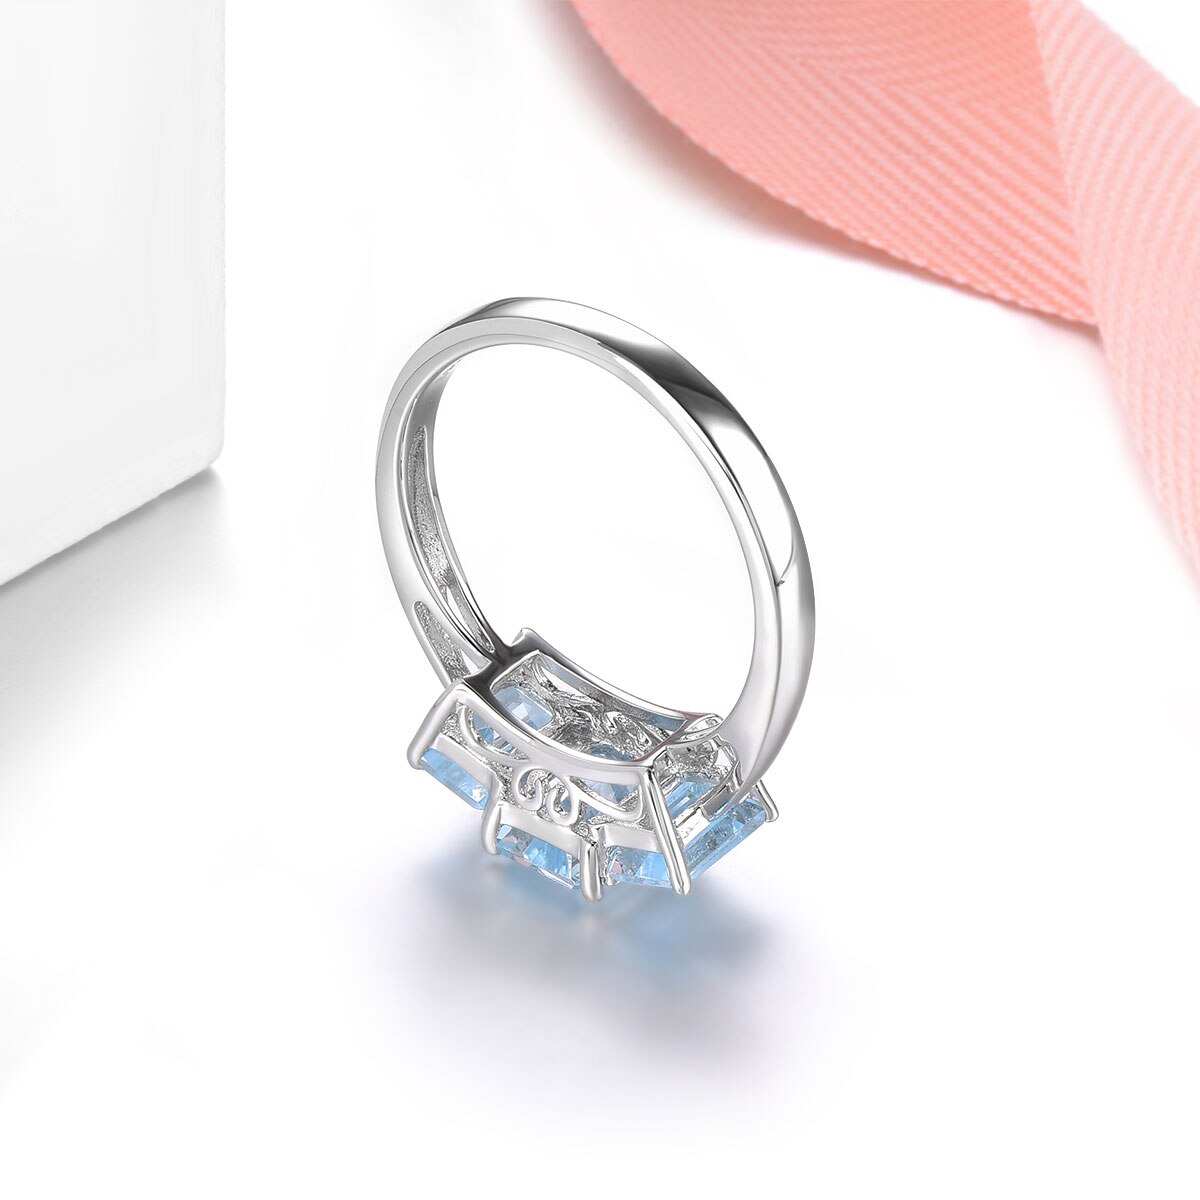 Natural Blue Topaz Sterling Silver Rings 2.5 Carats Genuine Sky Blue Topaz Women Classic Simple Design Jewelrys S925 Gifts